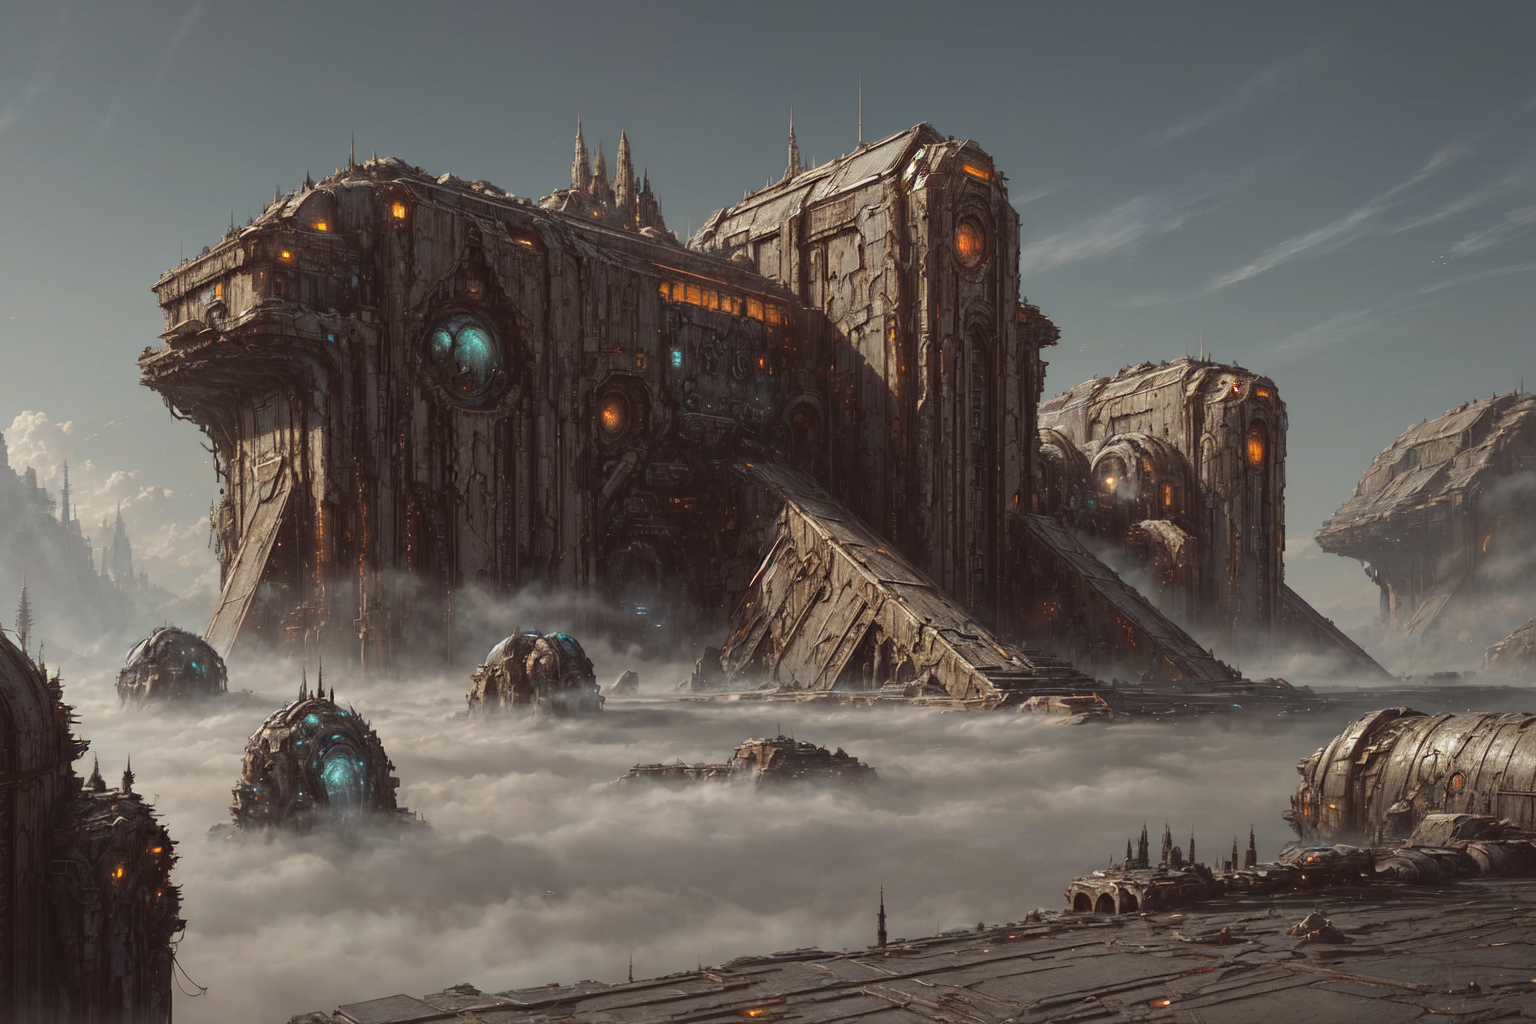 An Artistic Rendering of a Futuristic City with Ancient Ruins and a Building with Three Towers